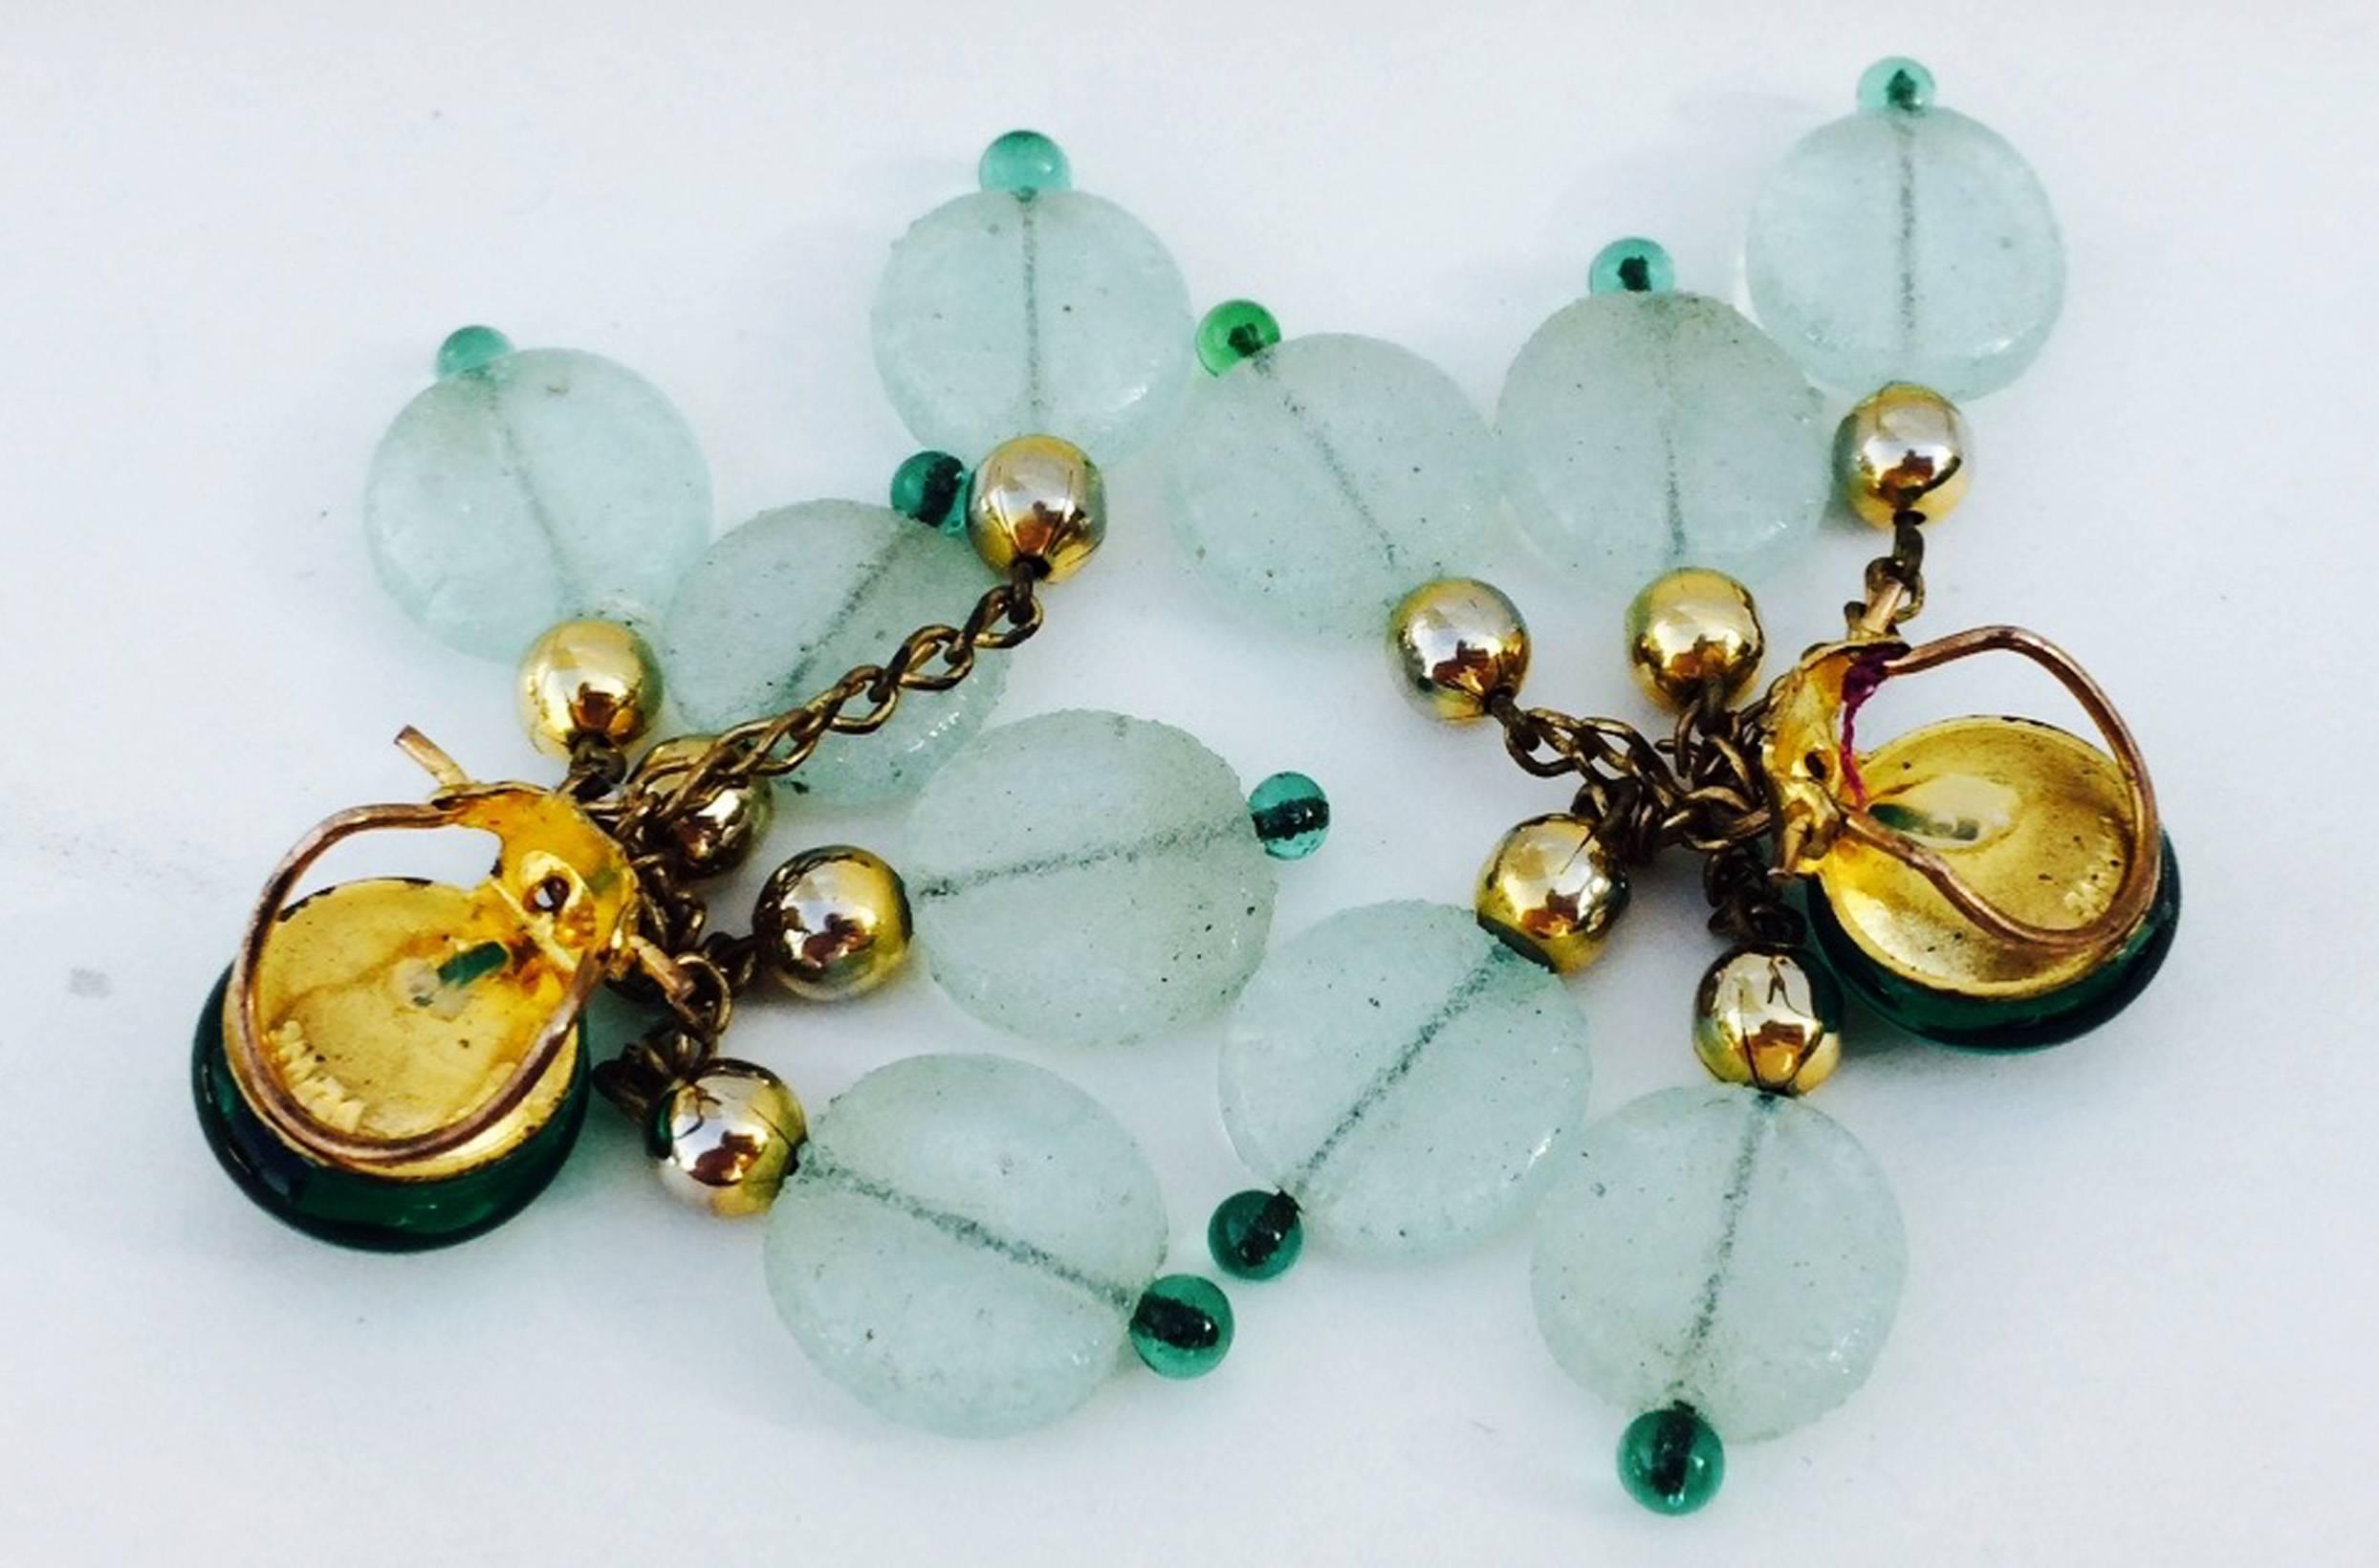 A fine vintage pair Maison Gripoix ear drops. Rare gilt metal items feature vivid green glass cabochons with etched seafoam green glass and gilt beaded fringed chains. Items retain original clip backs. Excellent.